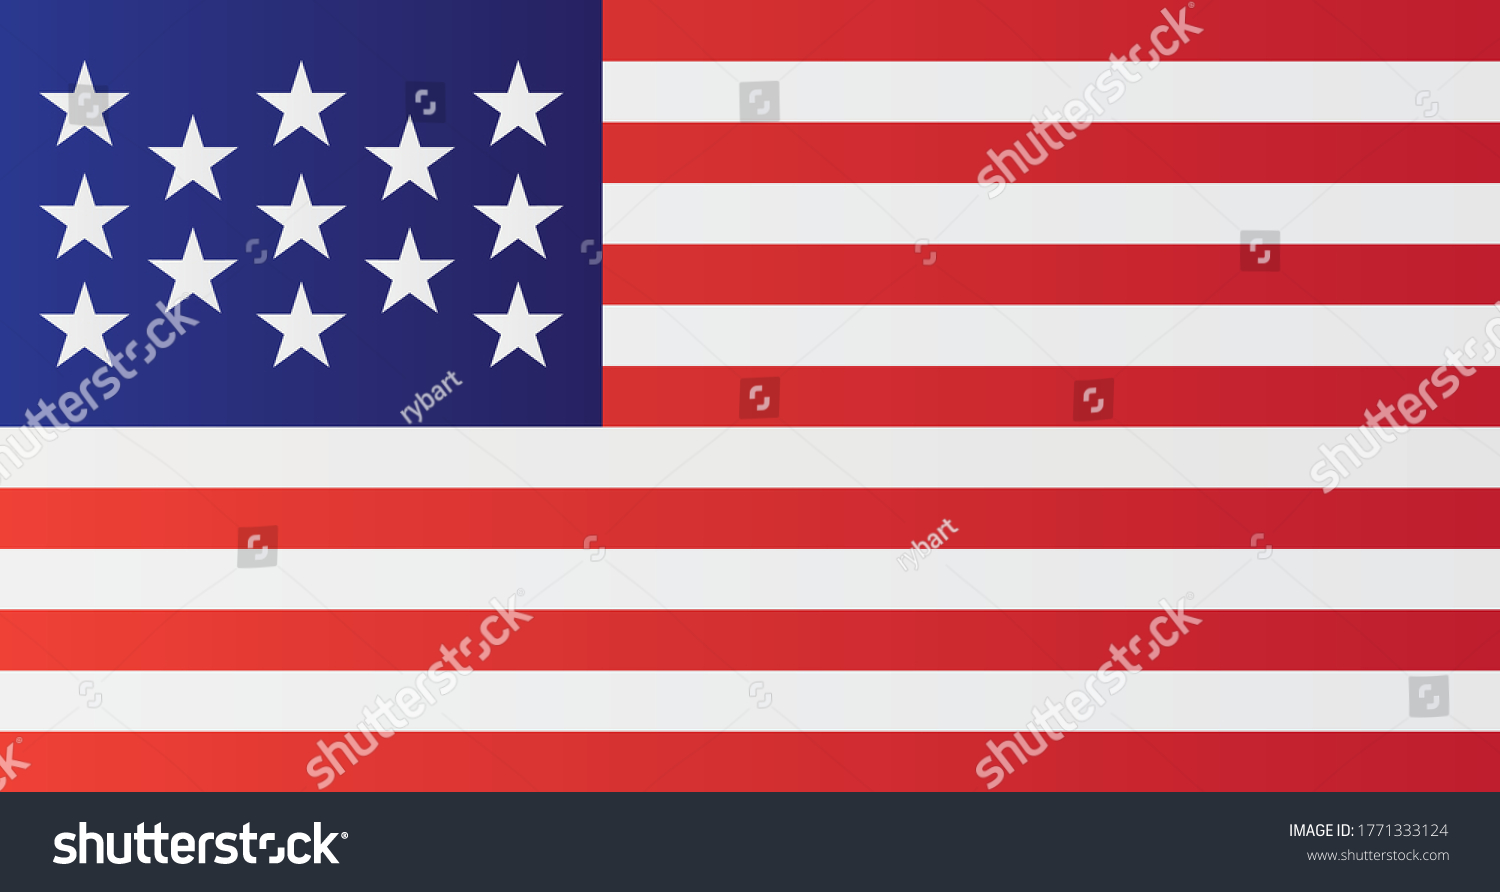 SVG of US national flag with 13 stars. United States vector illustration history symbol. In use 14 June 1777 to 1 May 1795.
 svg